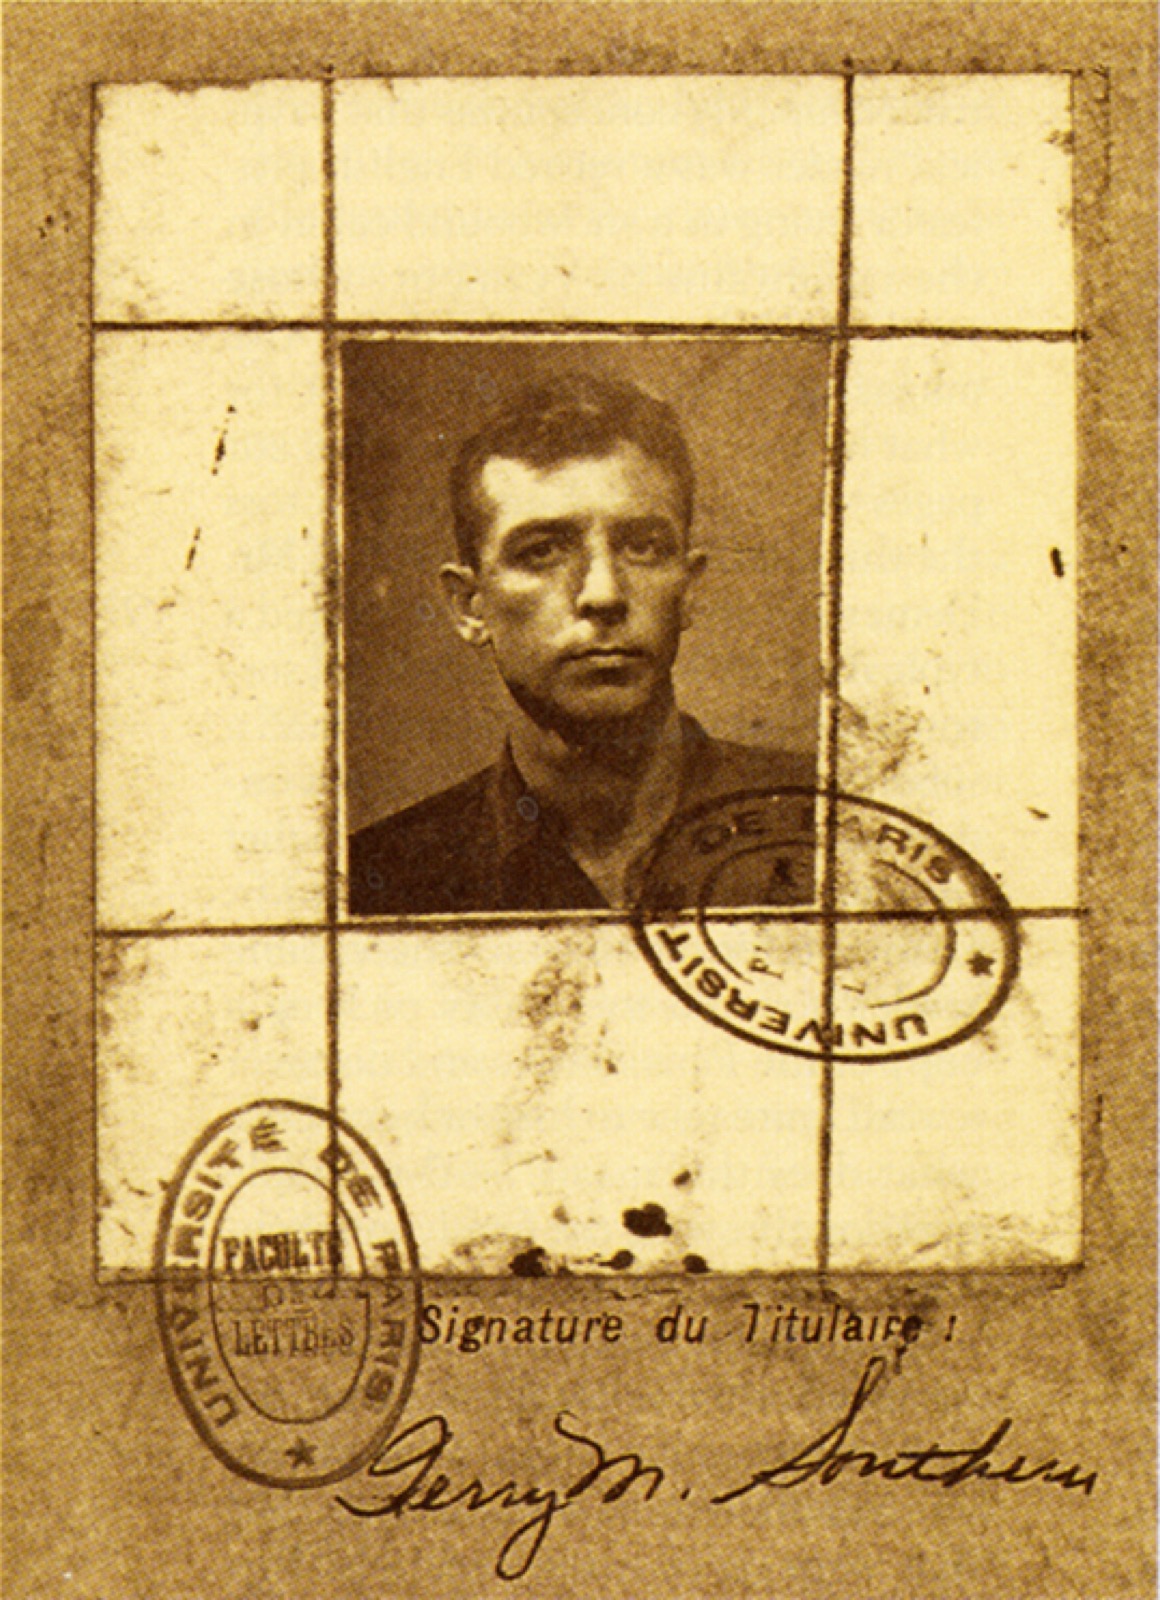 Terry Southern’s student ID card for the Sorbonne; courtesy of the Terry Southern Estate